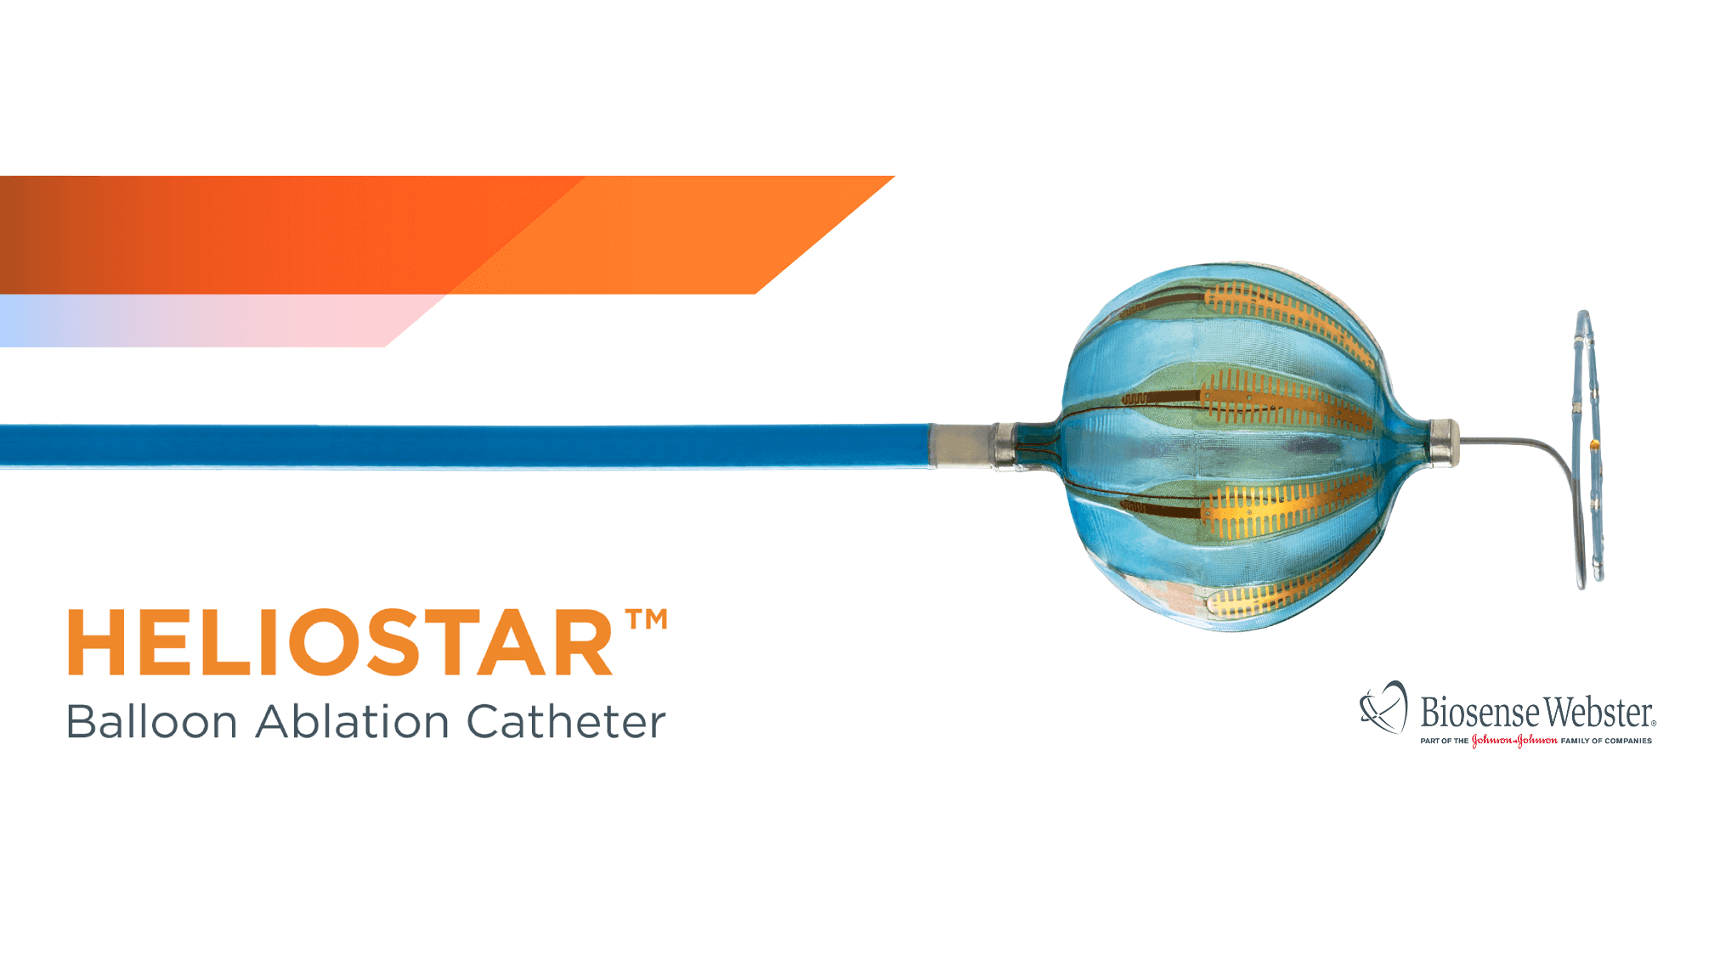 The novel HELIOSTAR™ Balloon Ablation Catheter is the first-ever radiofrequency balloon ablation catheter